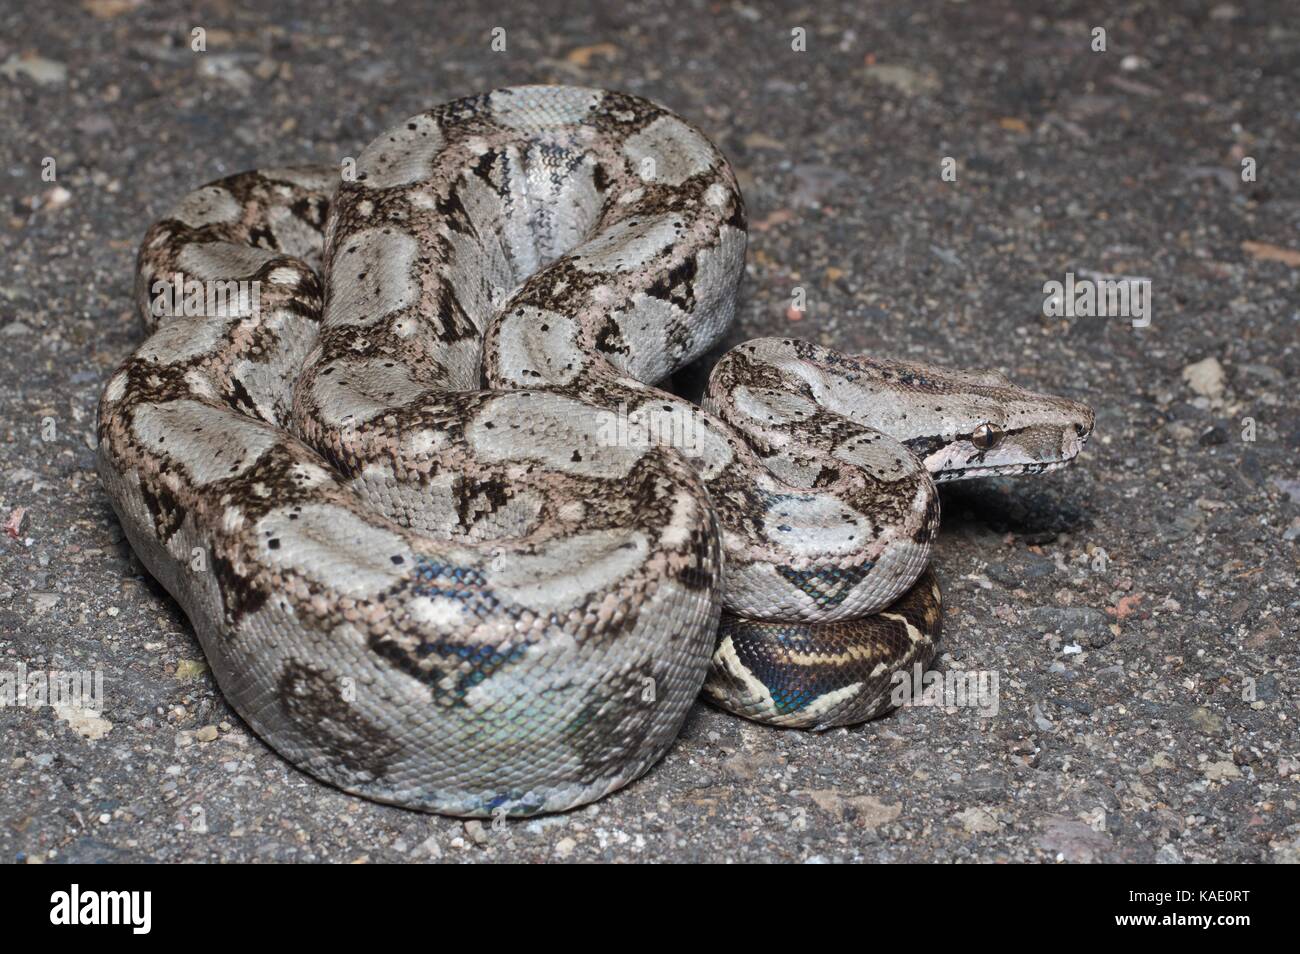 A Boa Constrictor (Boa imperator) on a paved road at night near Alamos, Sonora, Mexico Stock Photo